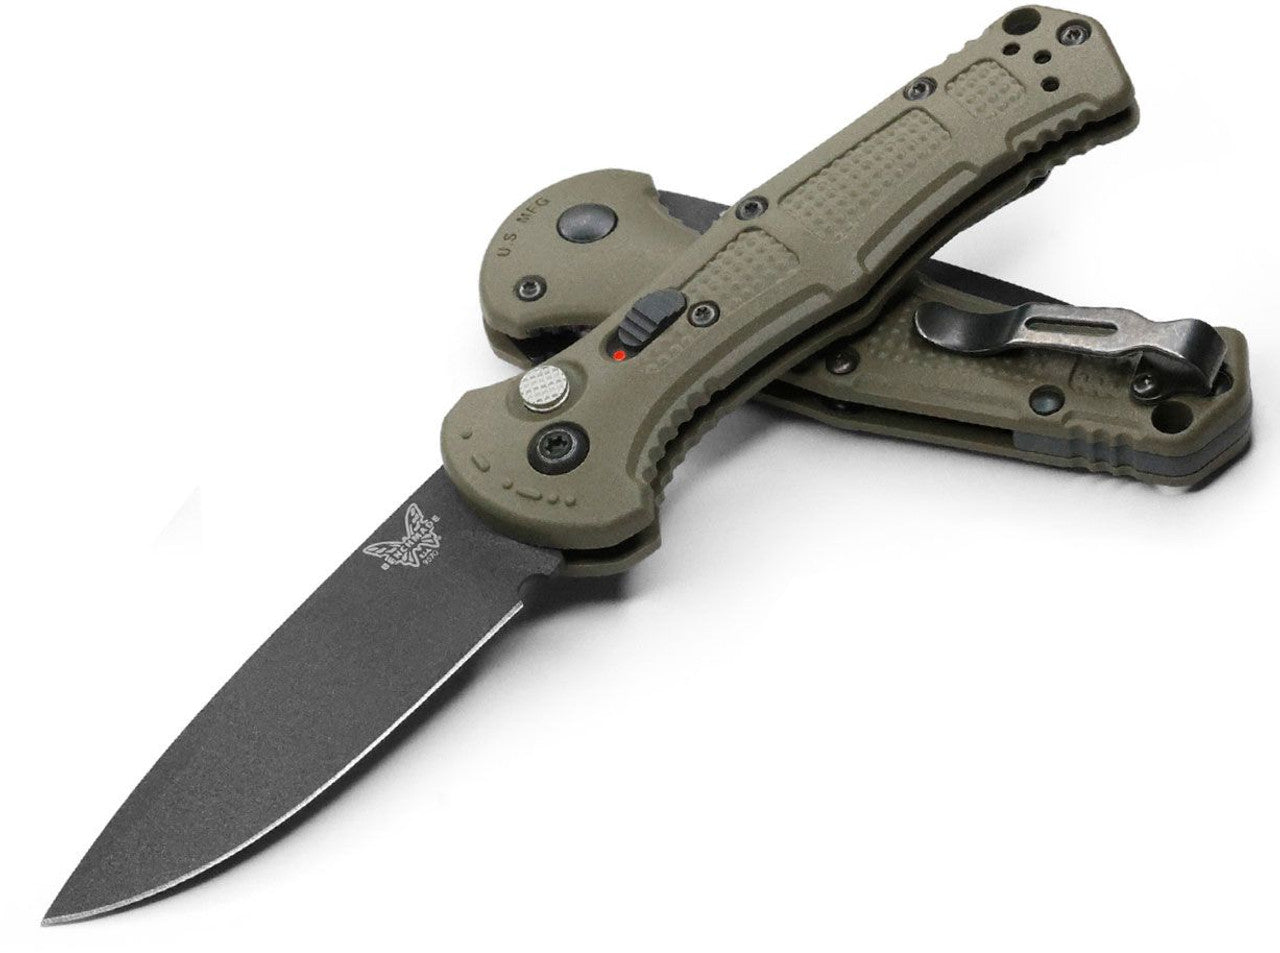 Benchmade Mini Claymore - Automatic - CPM-D2 Blade - Tan Grivory Handle - 9570BK-1